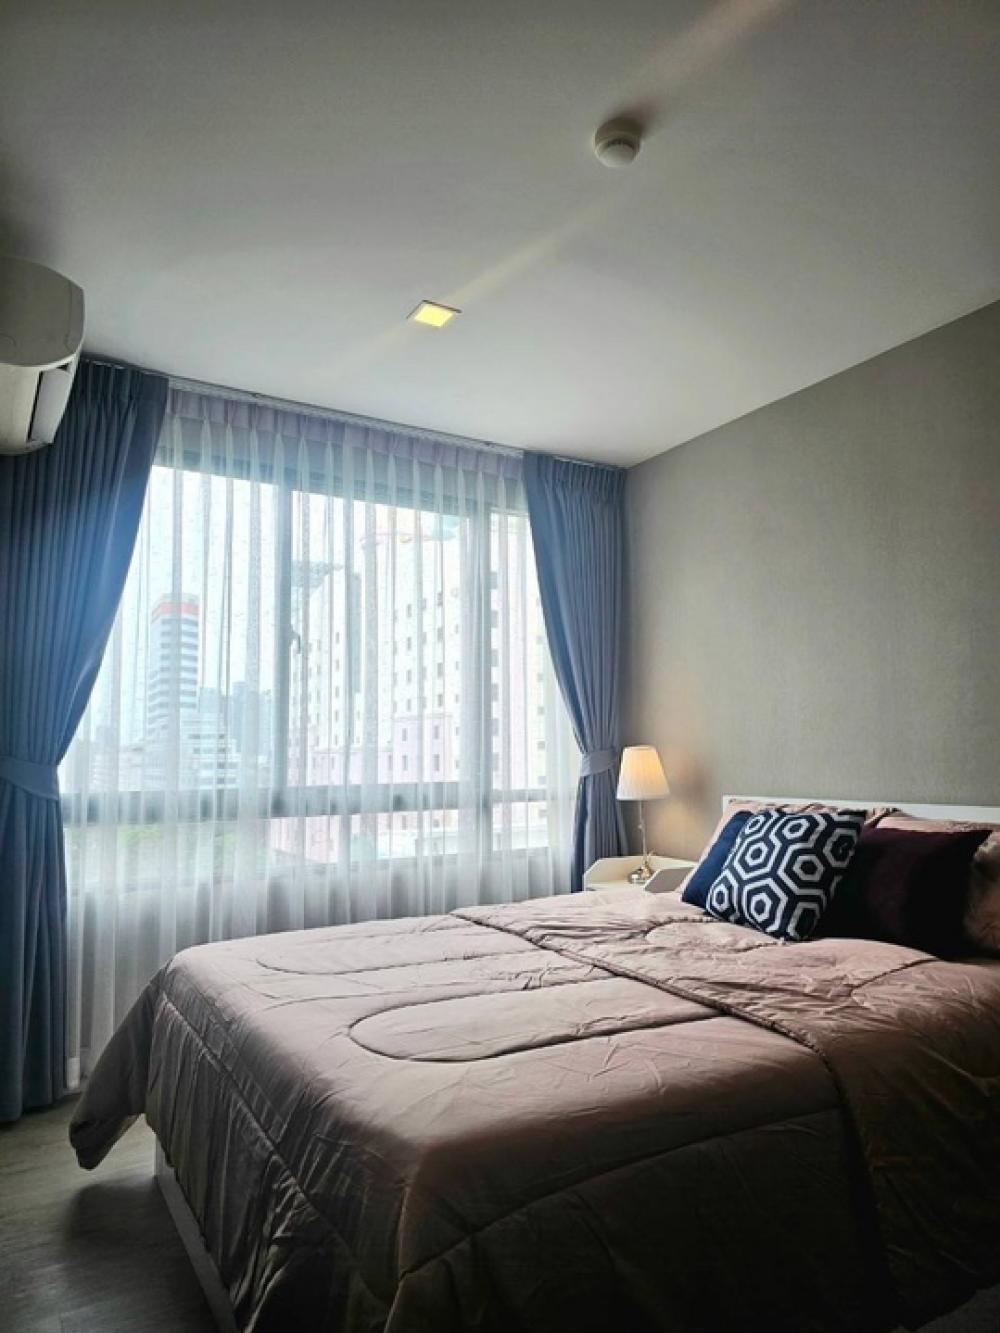 For RentCondoRatchadapisek, Huaikwang, Suttisan : ❤️❤️ Condo Metro Luxe Ratchada, Building D, interested line/tel 0859114585 ❤️❤️ 8th floor (pool view), large room size 36 sq m, complete electrical appliances ✅ 2 air conditioners, bedroom/living room ✅ Front-loading washing machine ✅ Microwave ✅ Water he